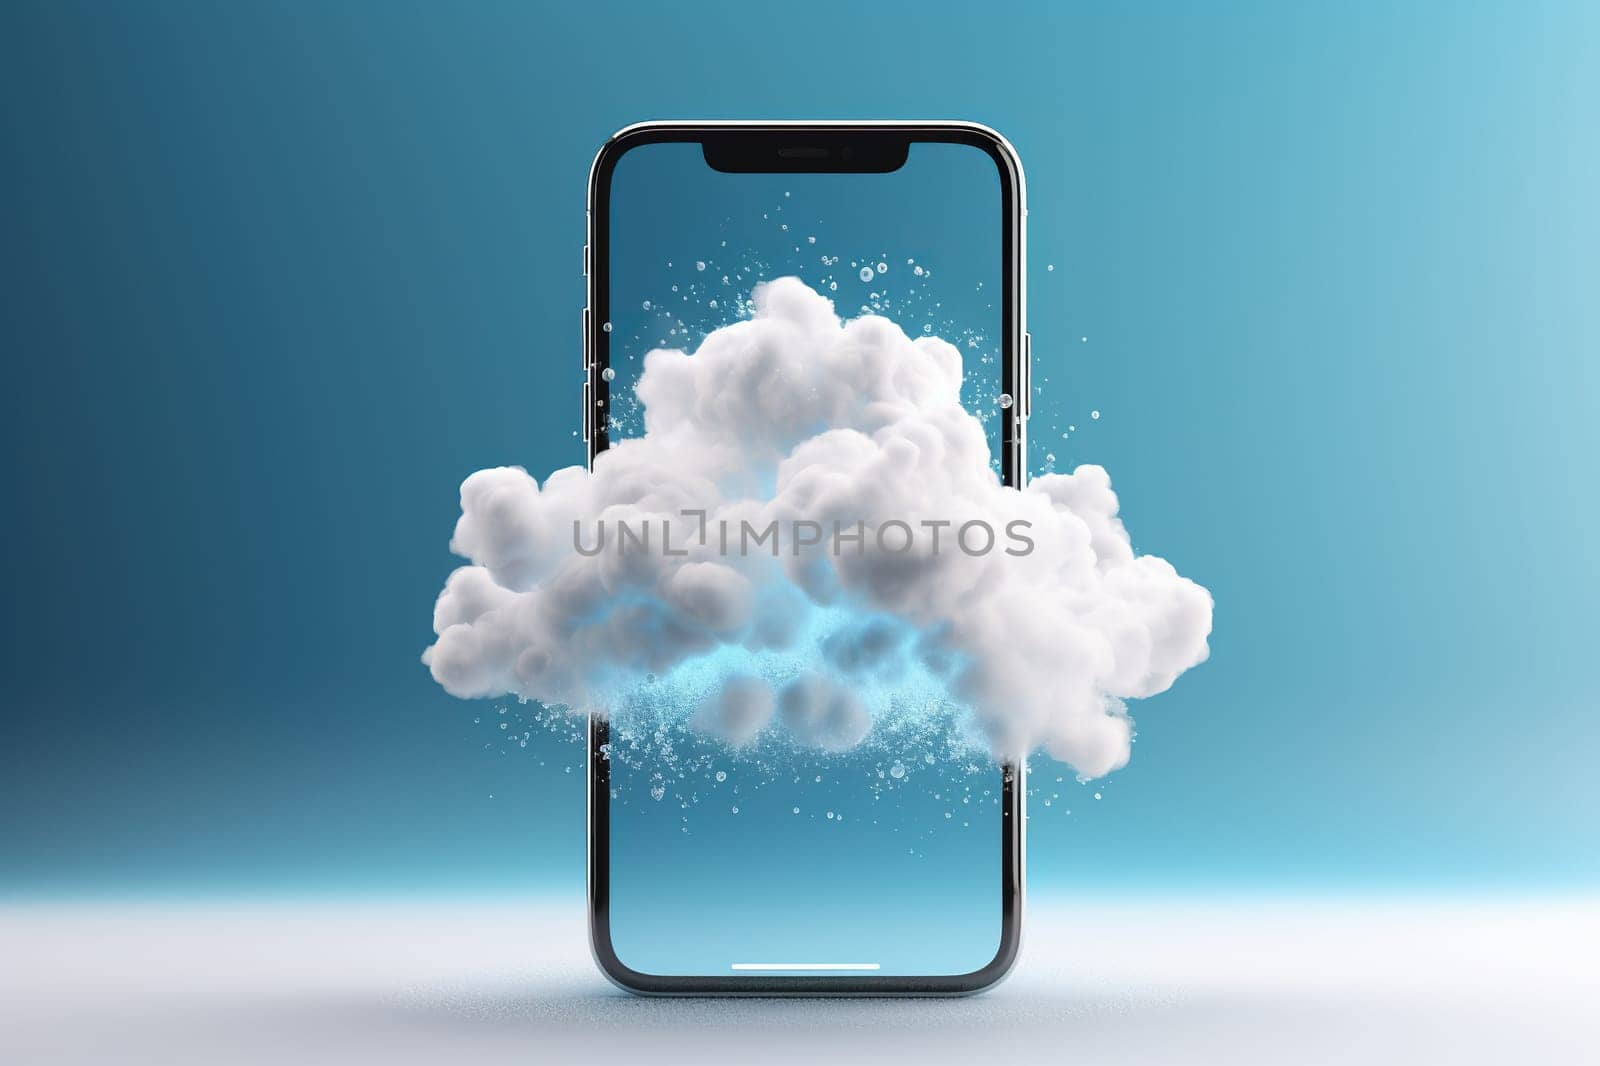 Realistic image of clouds on a smartphone screen. The concept of high-quality photographs on a smartphone.